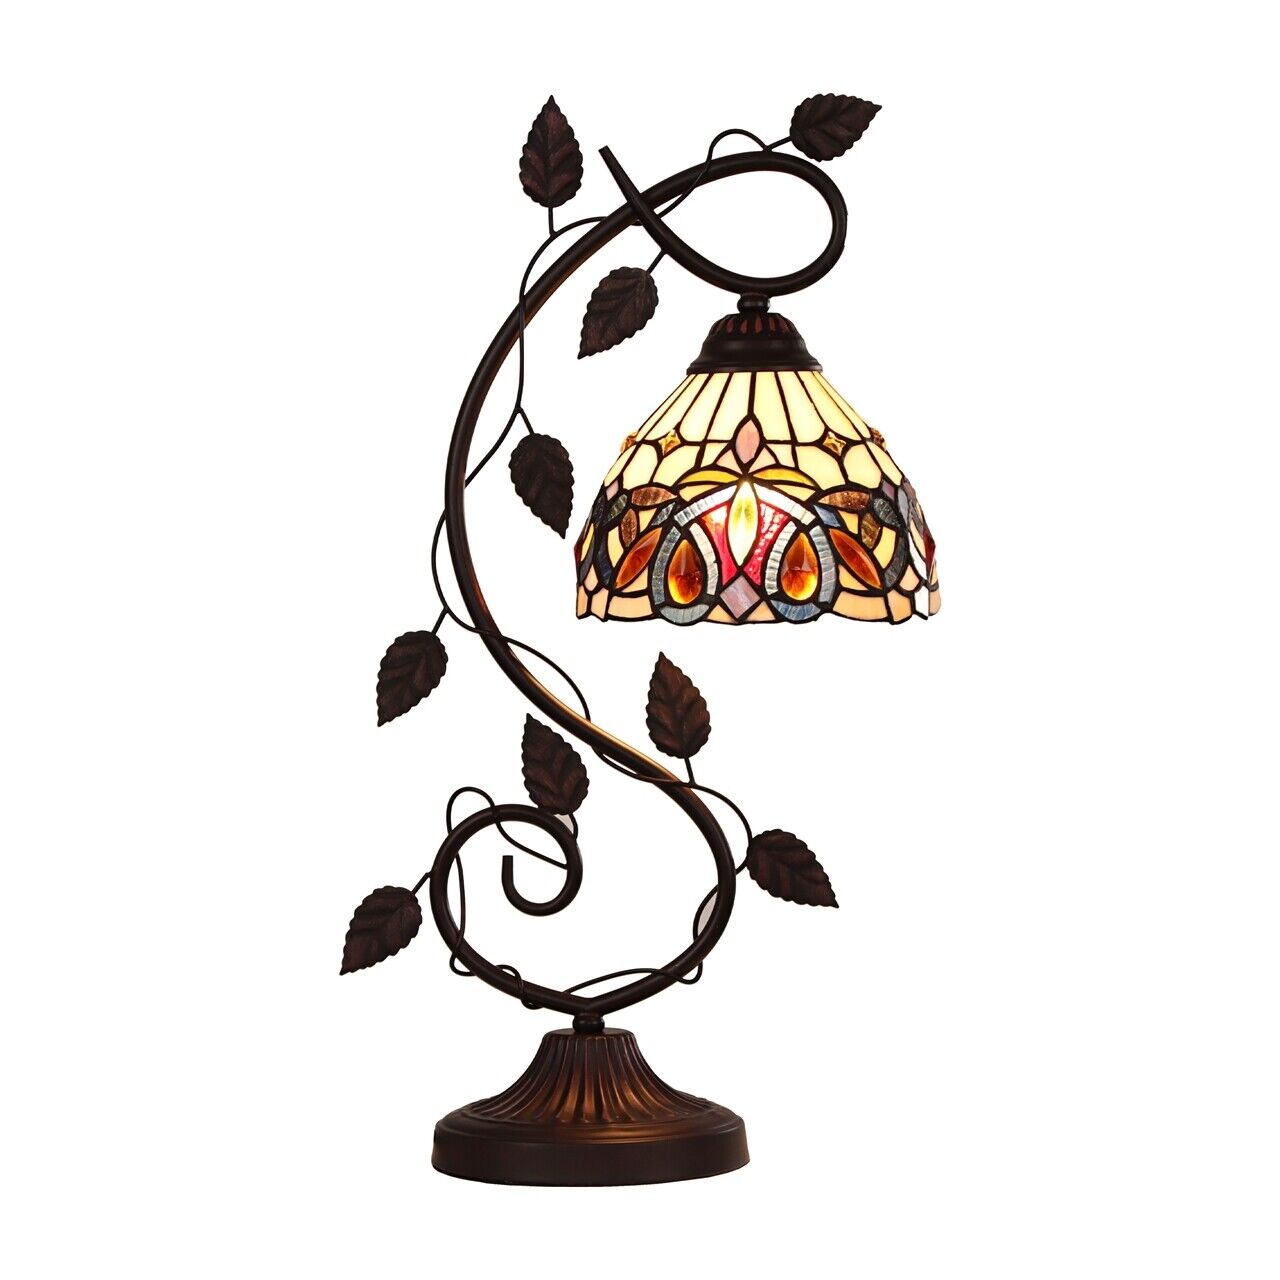 22.64" Vintage Style Stained Glass Table Lamp